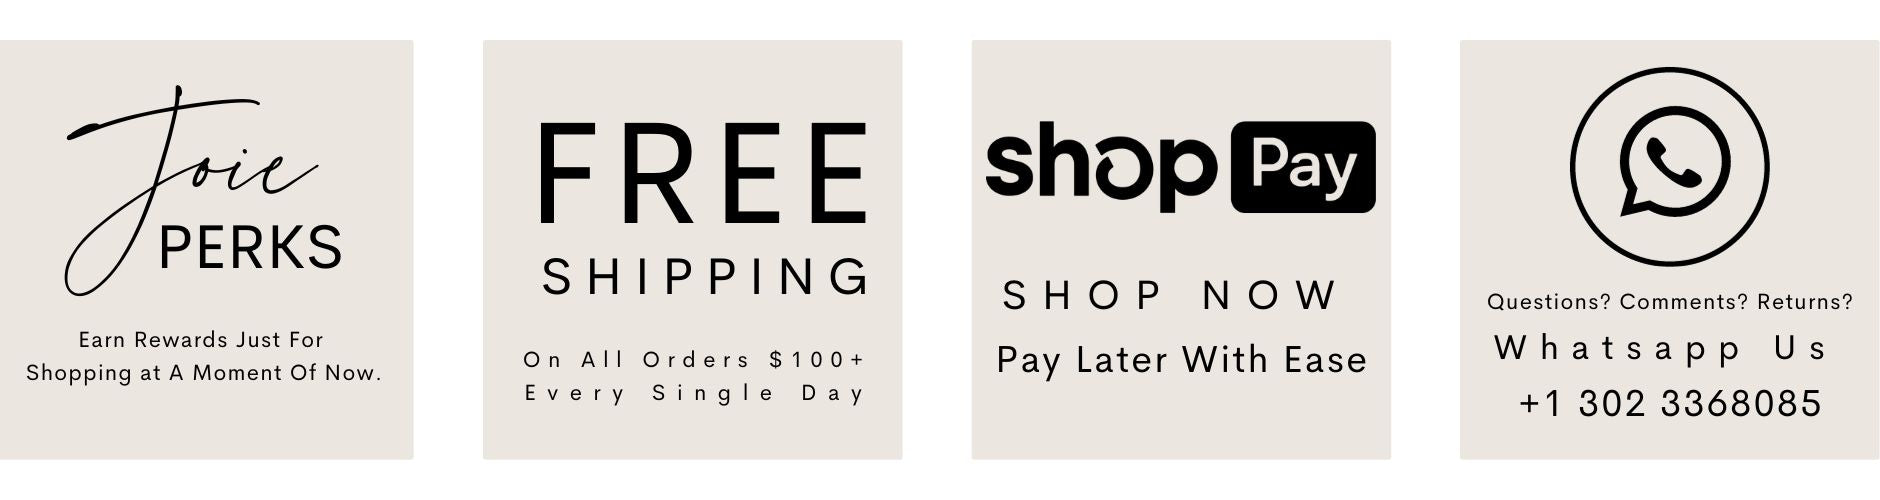 shopping rewards, free shipping, shop now and pay later, whatsapp contact us customer service